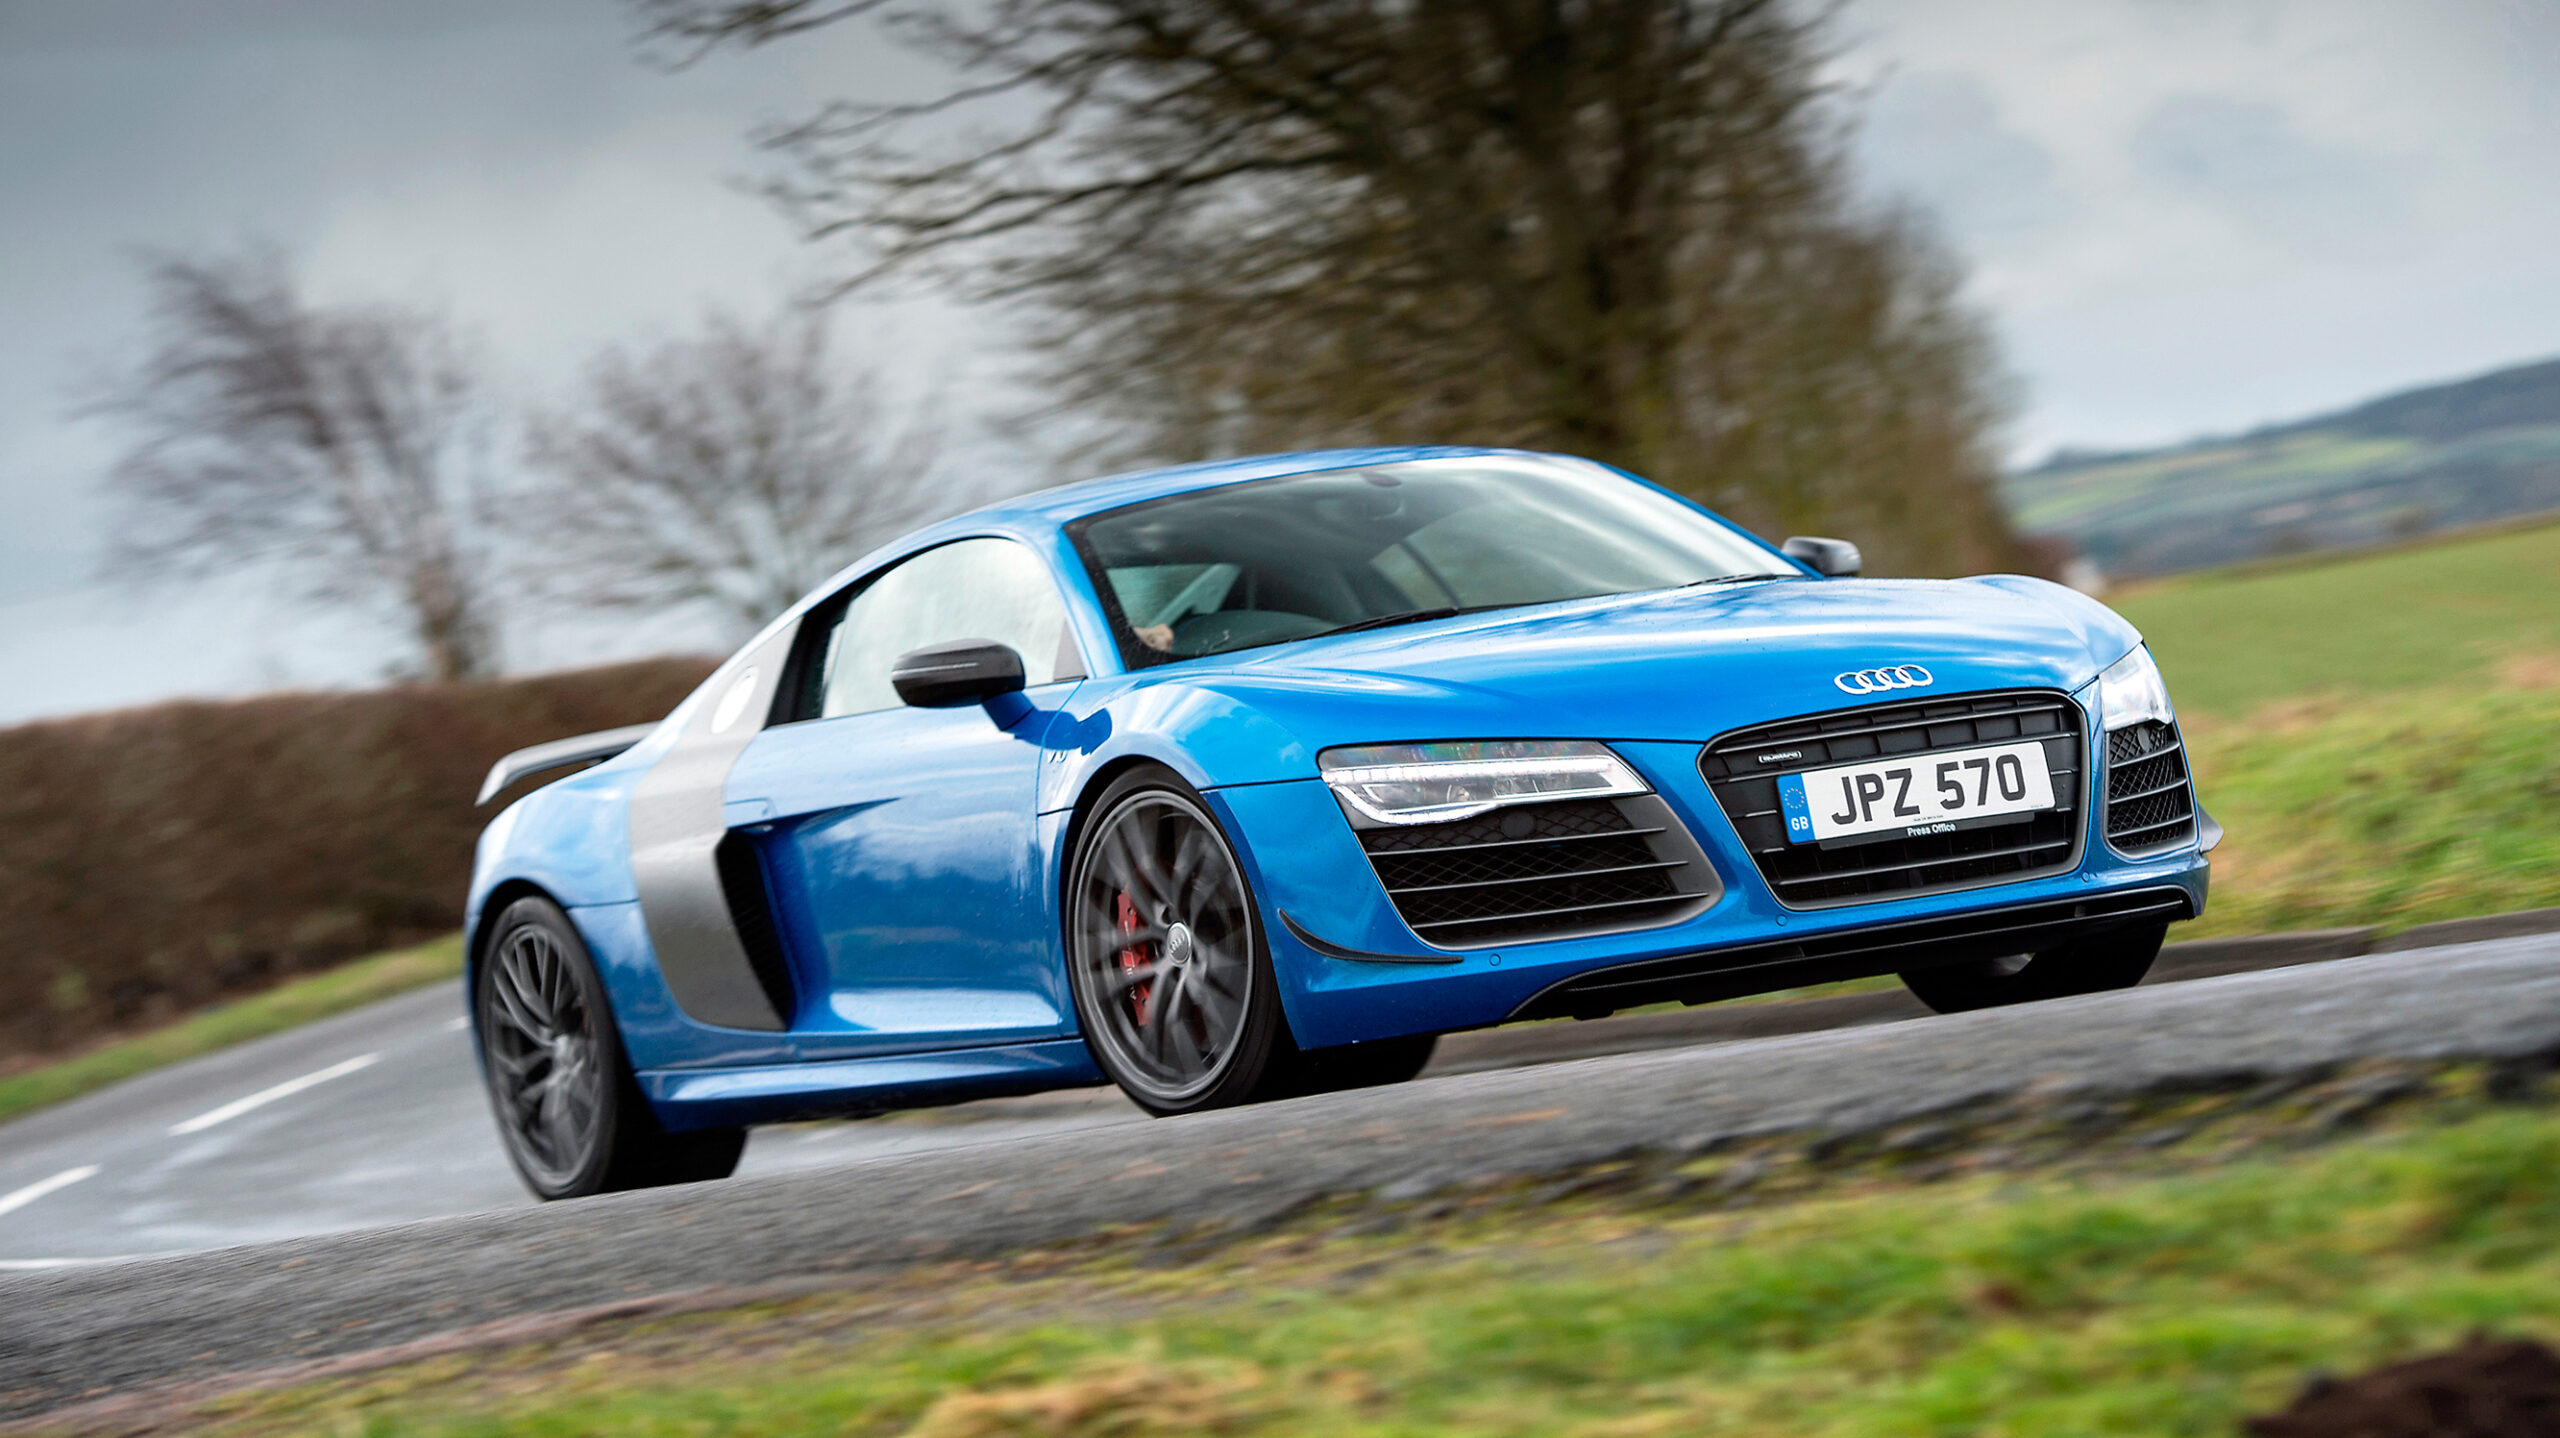 Cars You Never Knew Existed Part 5: The Audi R8 LMX